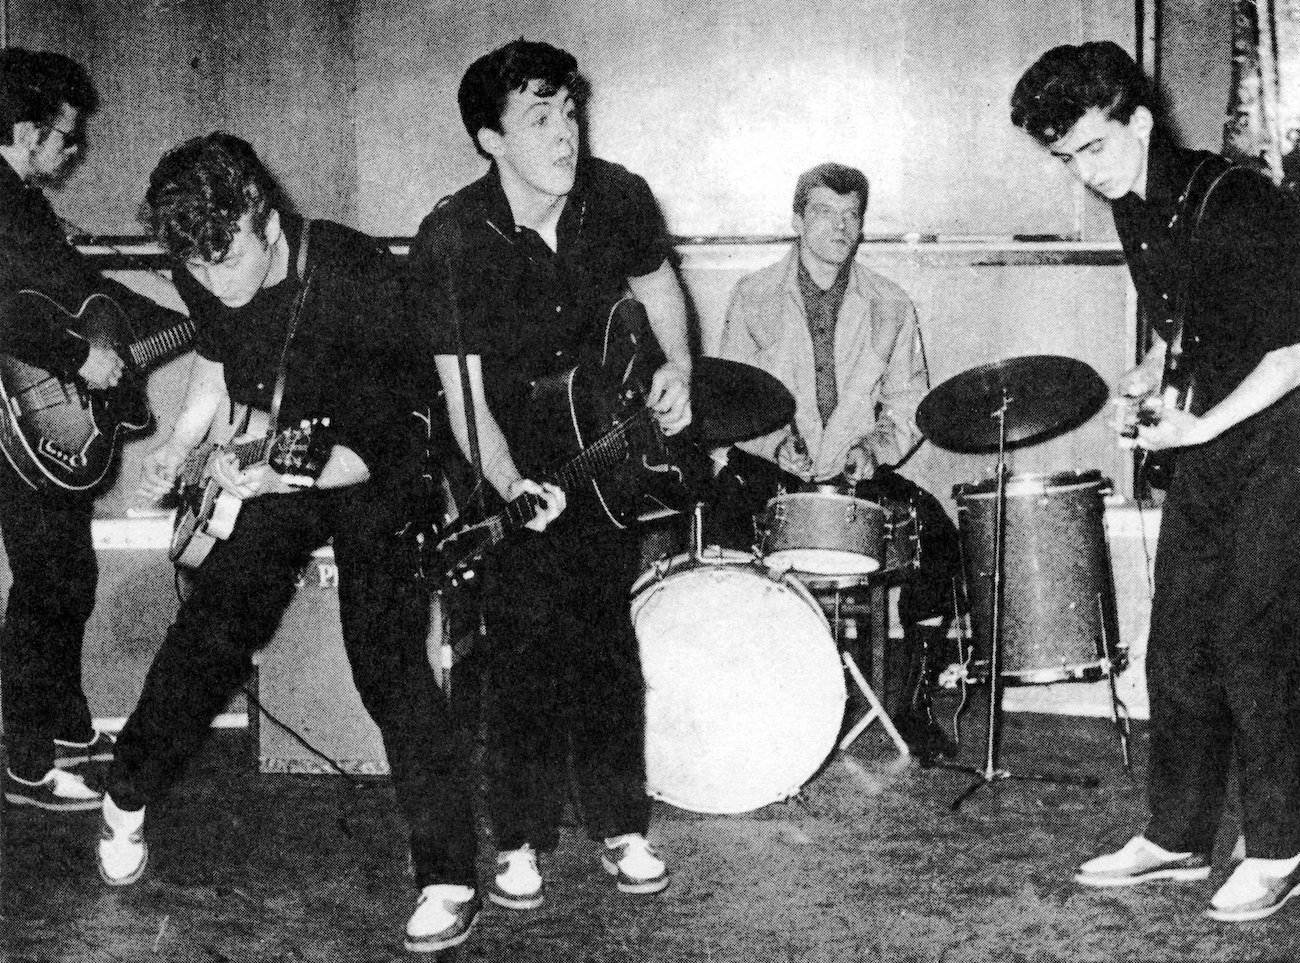 The Silver Beatles performing in 1960.